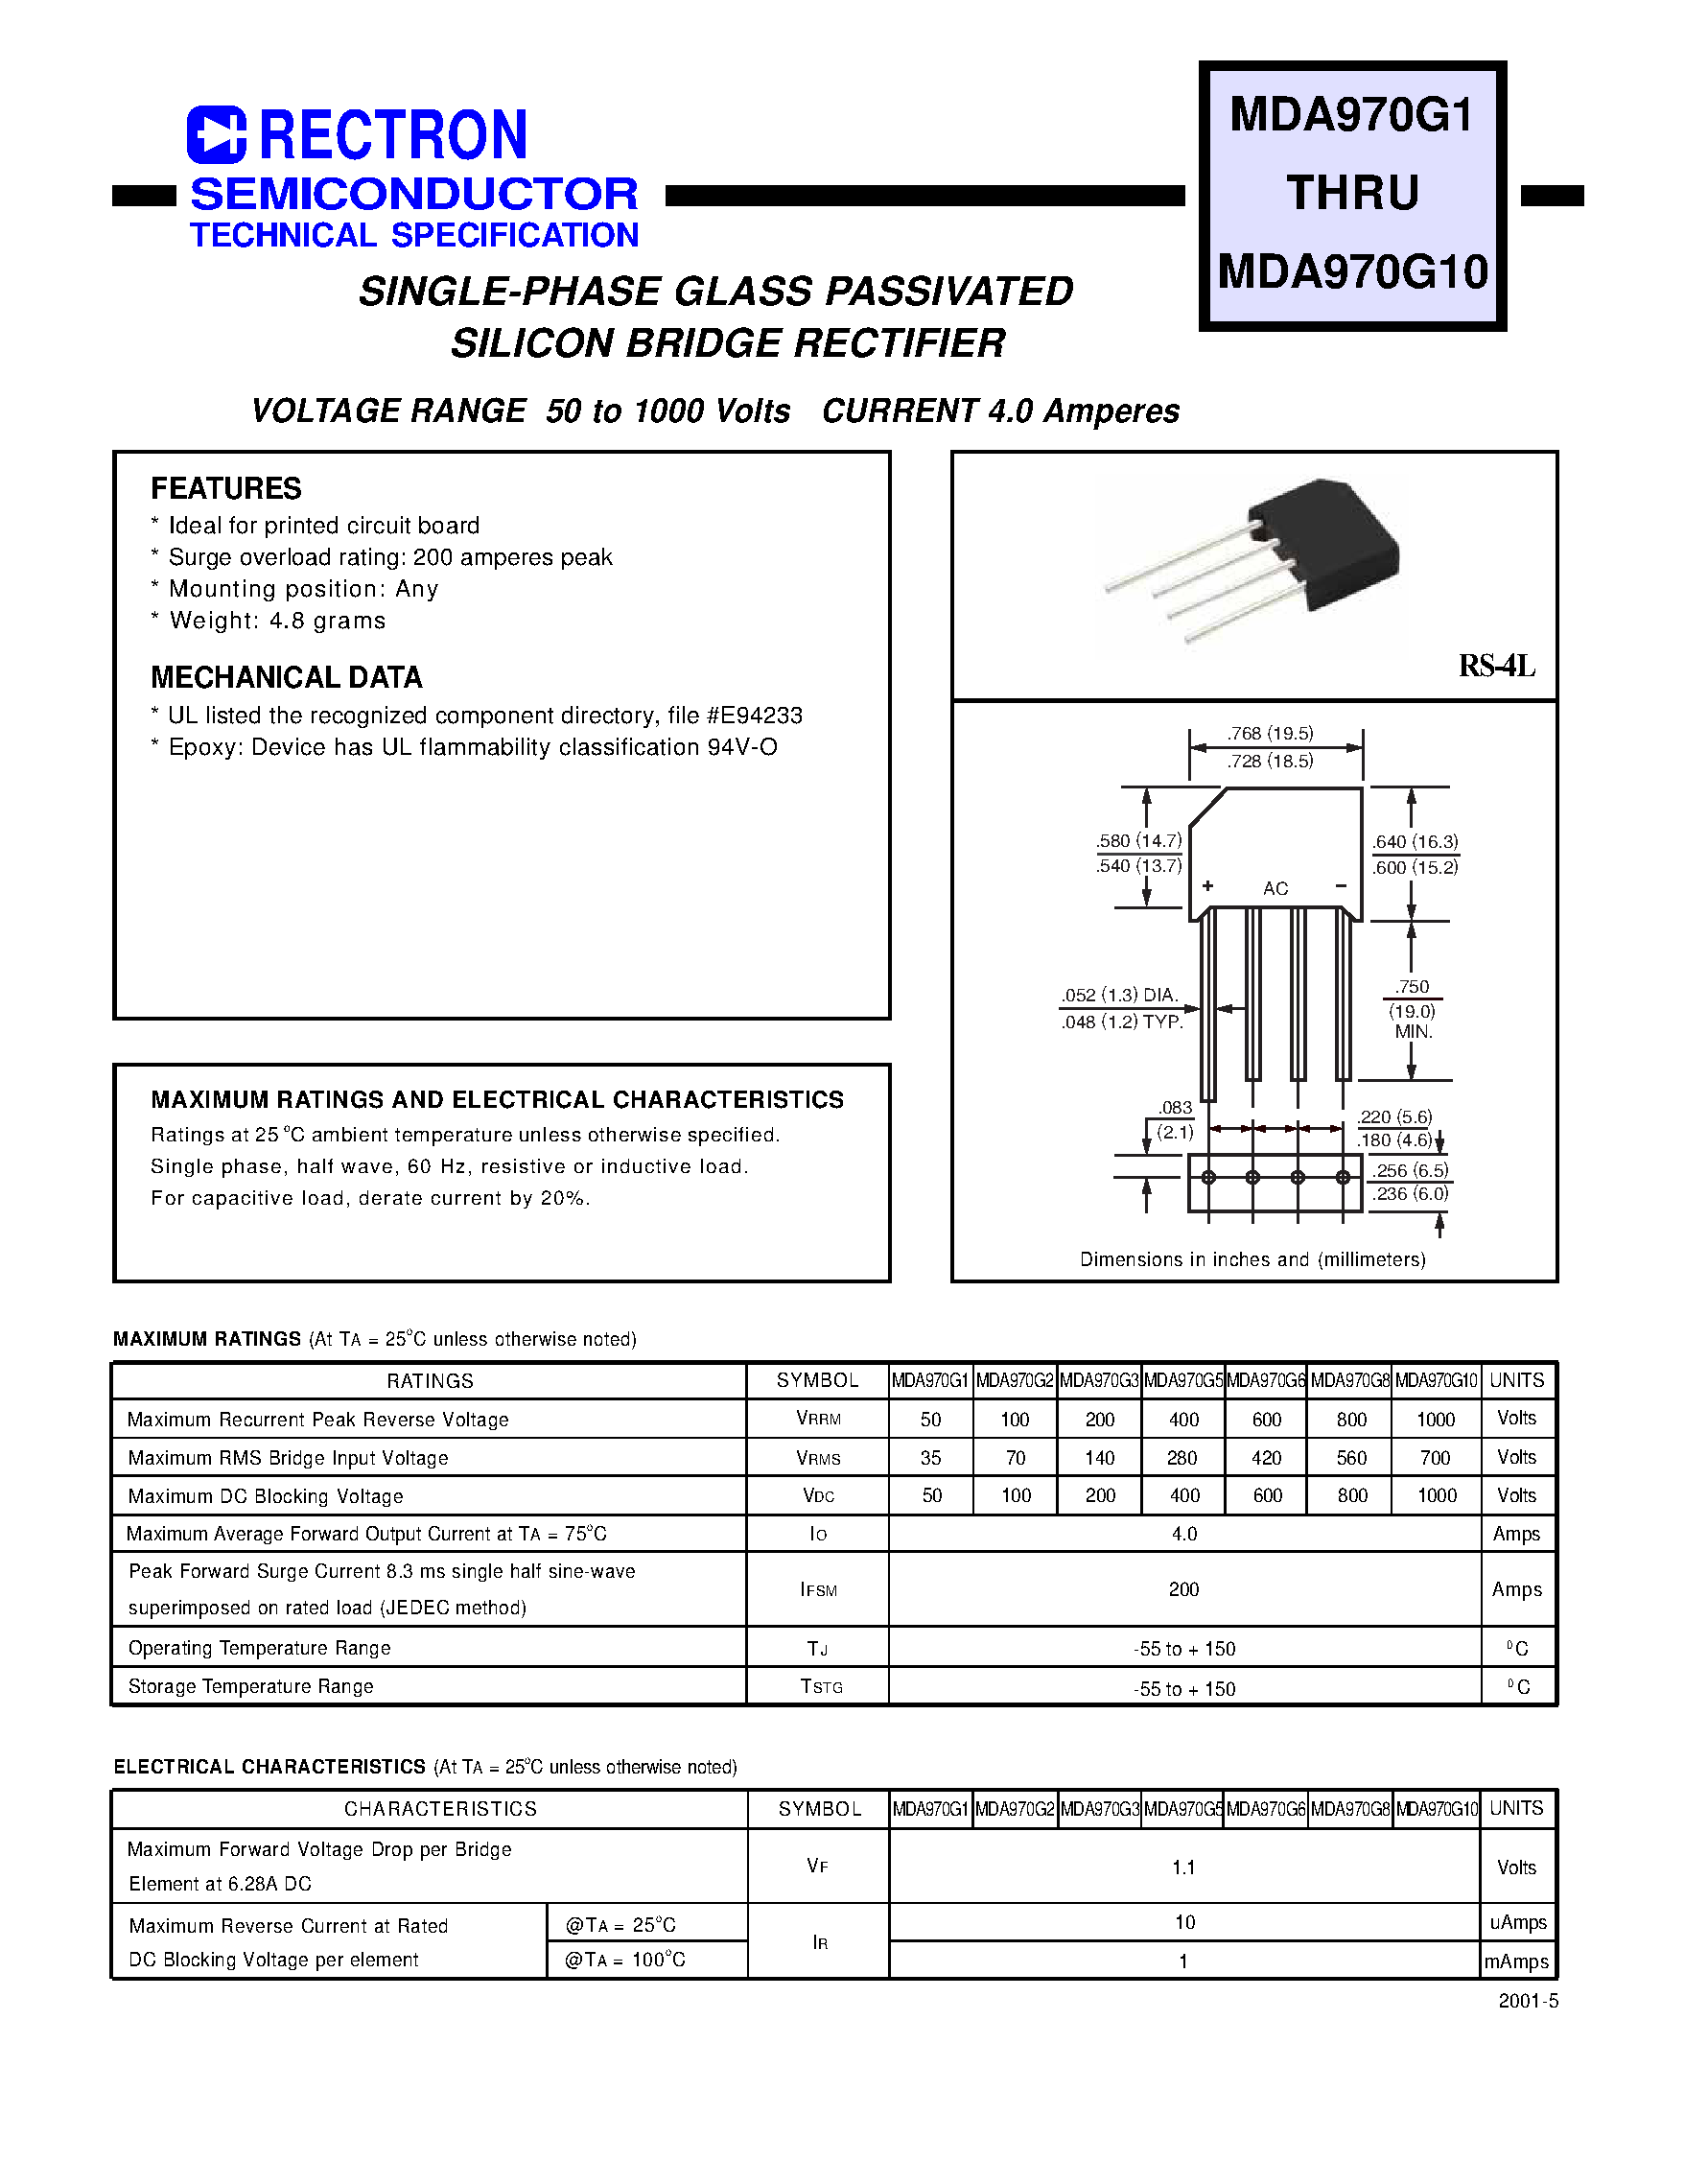 Даташит MDA970G10 - SINGLE-PHASE GLASS PASSIVATED SILICON BRIDGE RECTIFIER (VOLTAGE RANGE 50 to 1000 Volts CURRENT 4.0 Amperes) страница 1